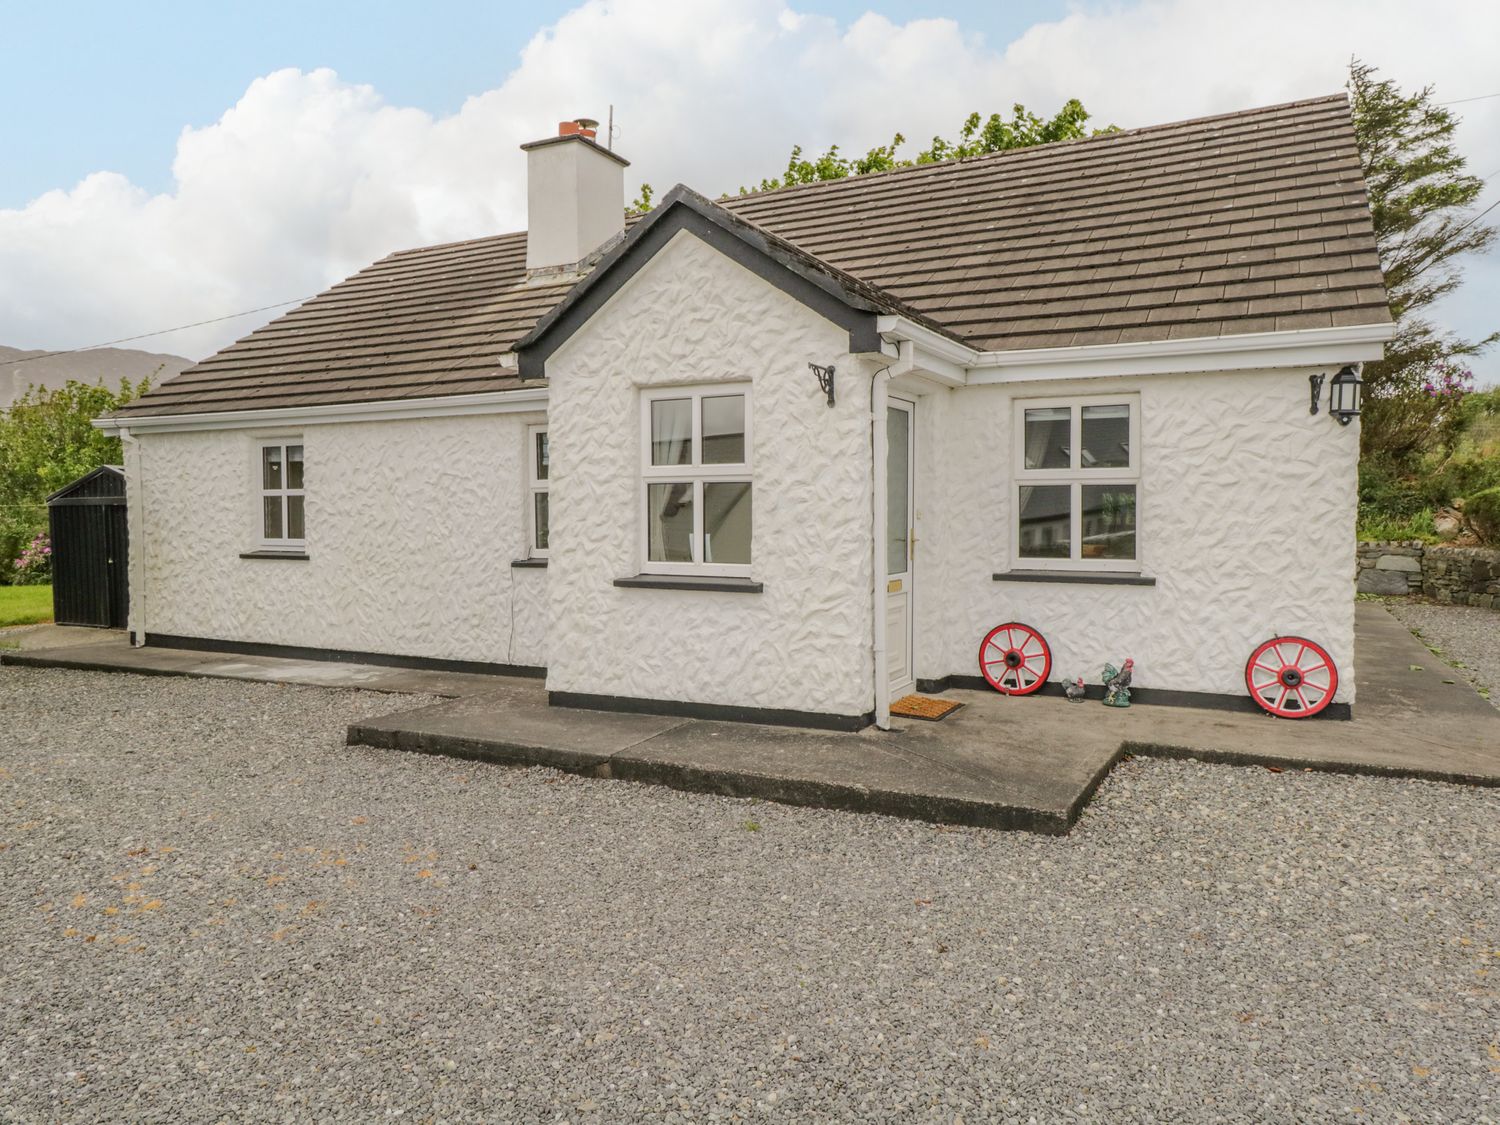 Stoney Cottage - Shancroagh & County Galway - 4402 - photo 1